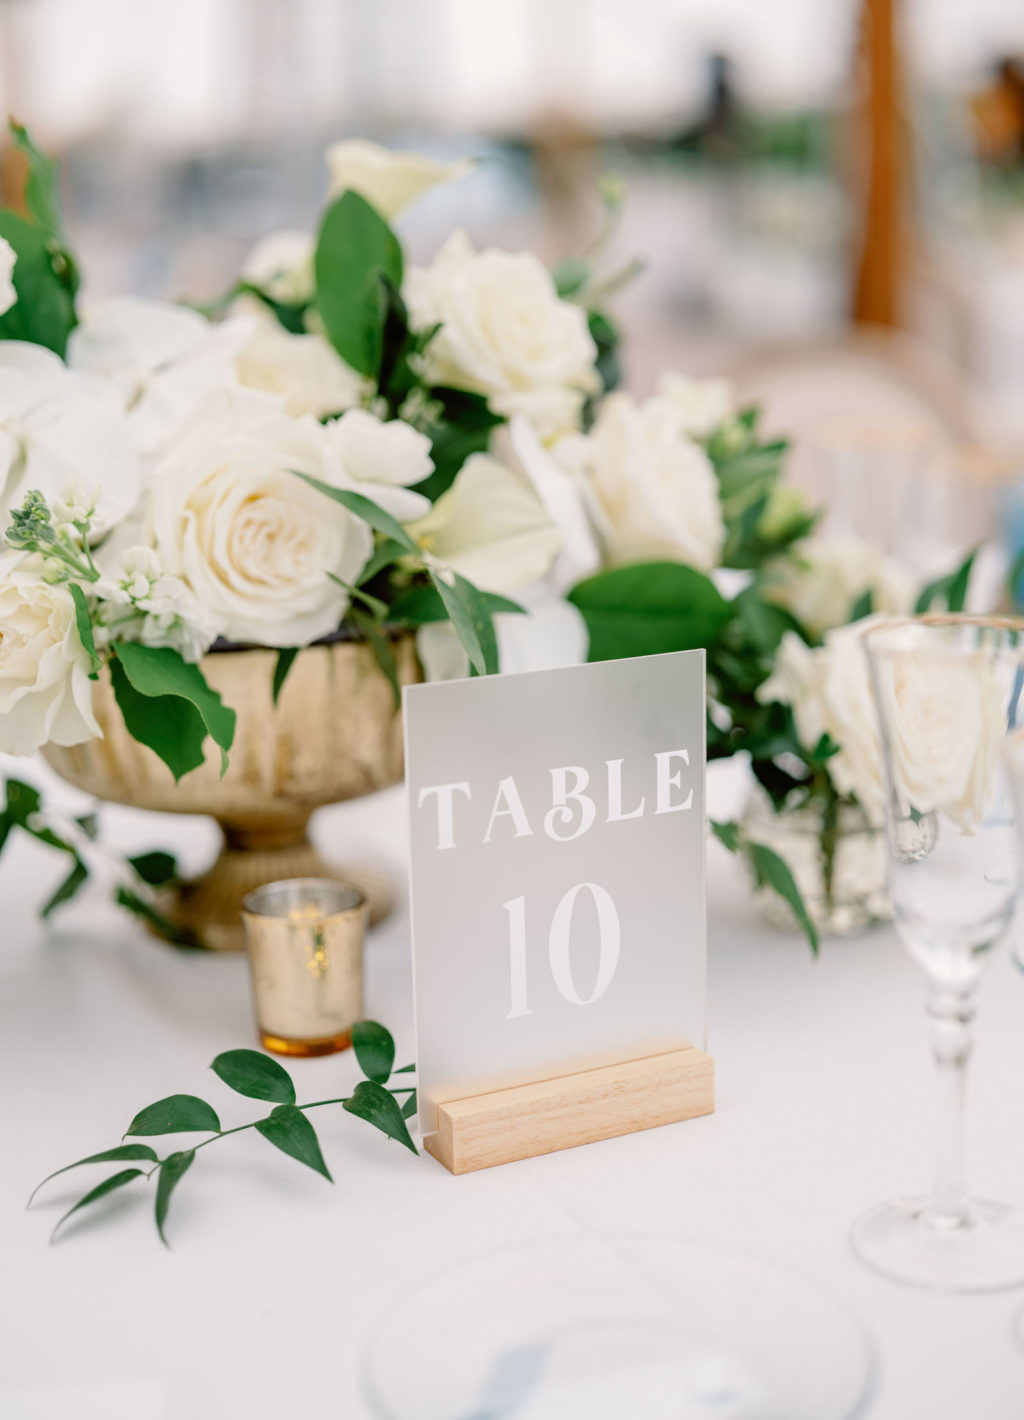 Modern Elegant Wedding Reception Decor, Acrylic Table Number Sign, Gold Vase with White Roses and Gold Mercury Votive | Tampa Bay NK Productions Wedding Planning